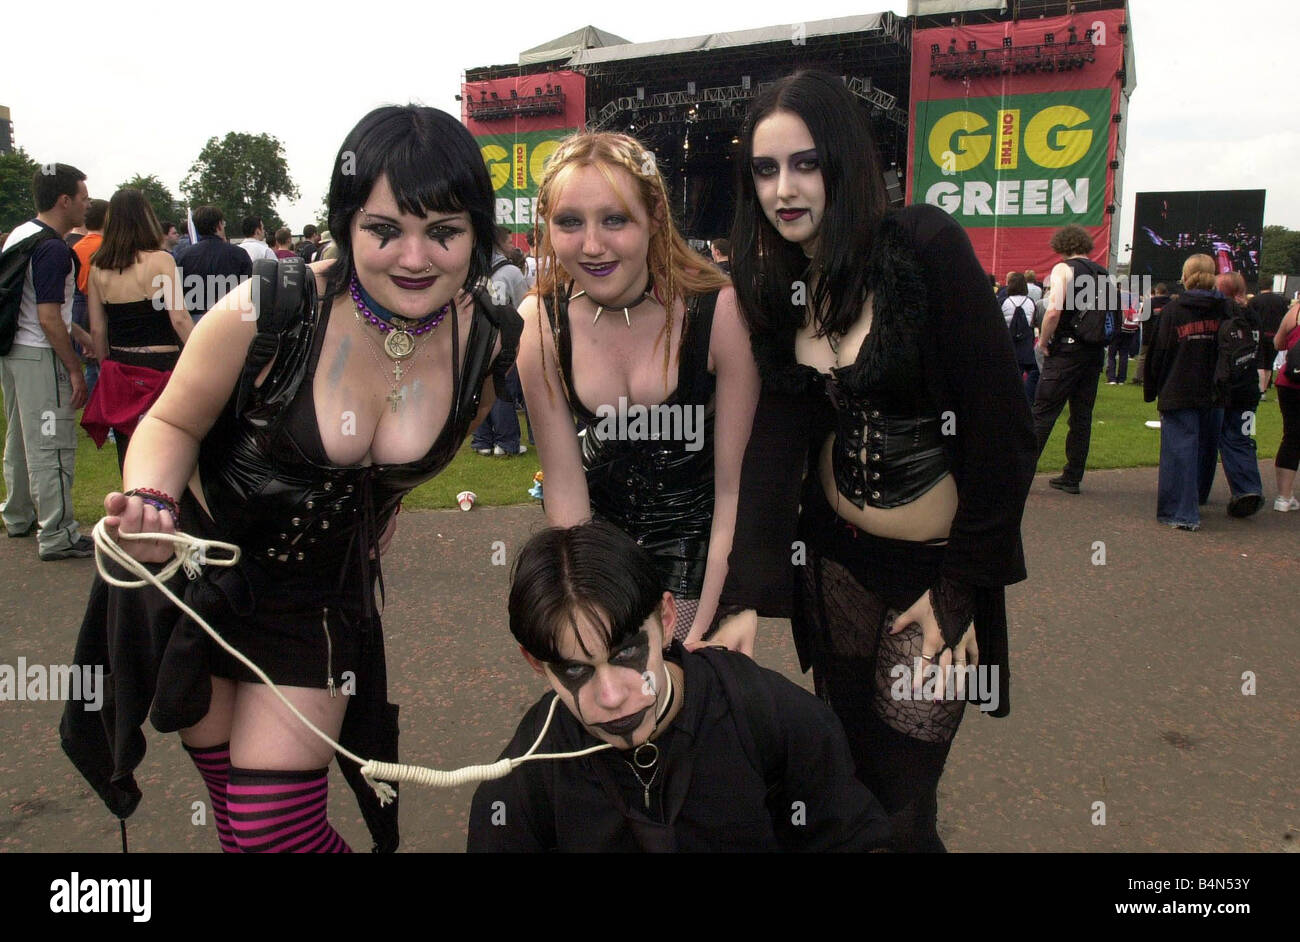 Gig on the Green August 2001 Marilyn Manson fans Jill Cairns Stephanie Kewell Jamz Hoy and Watson Green Stock Photo - Alamy